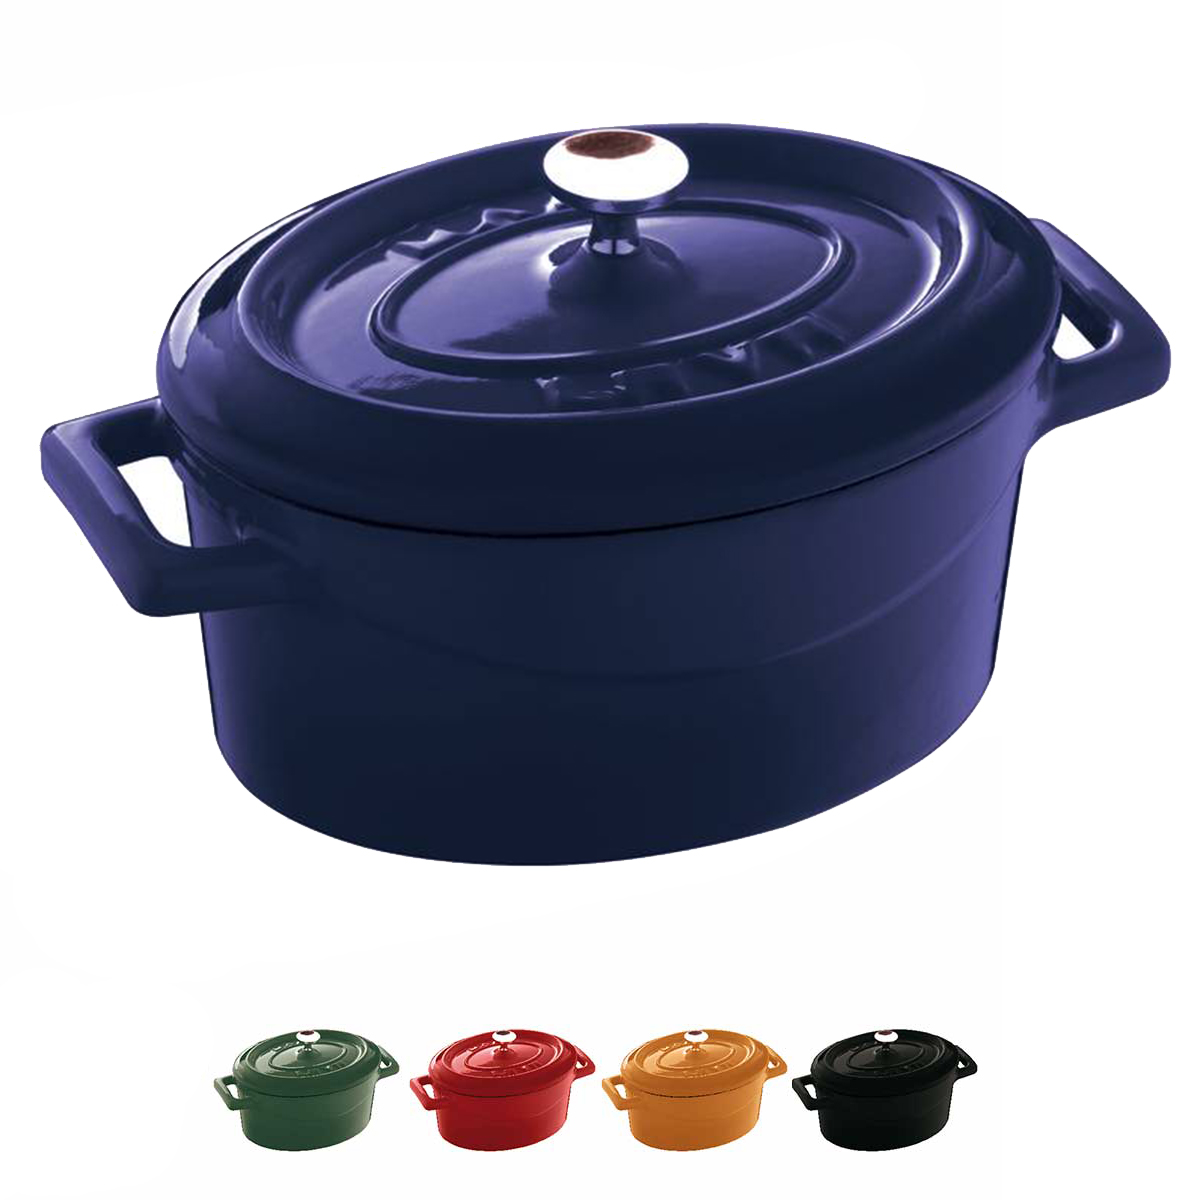 Paderno - Cocotte ghisa 12x9 cm - Italian Cooking Store